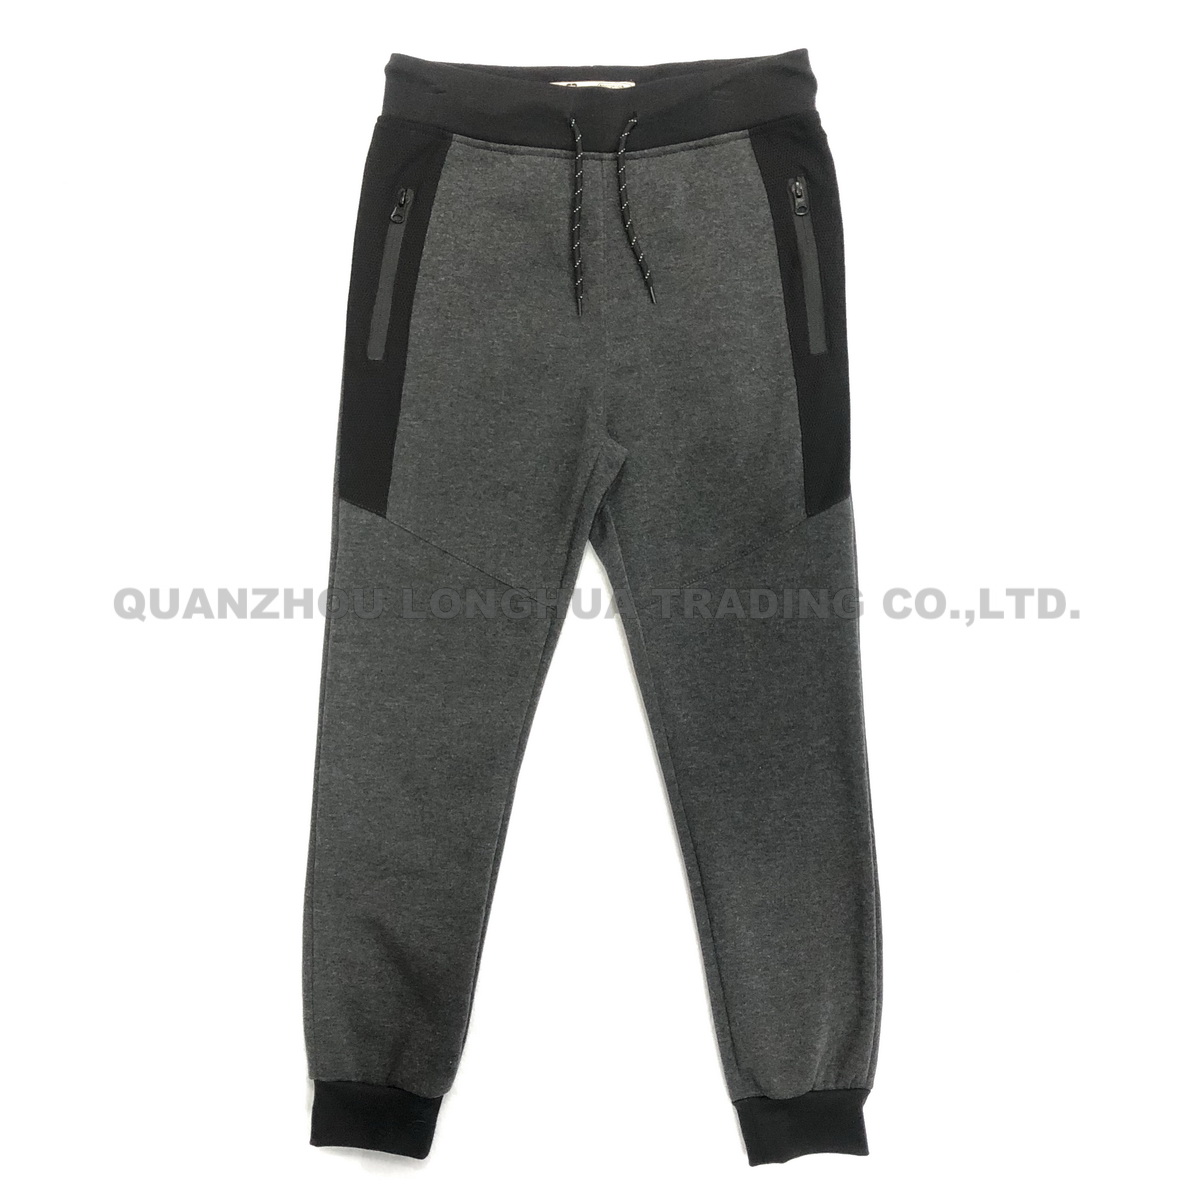 Men′s and Boy′s Joggers Casual Knitwear Jogging Pants Trousers Apparel Kids Wear Polyester Fleece Joggers with Mesh Panels